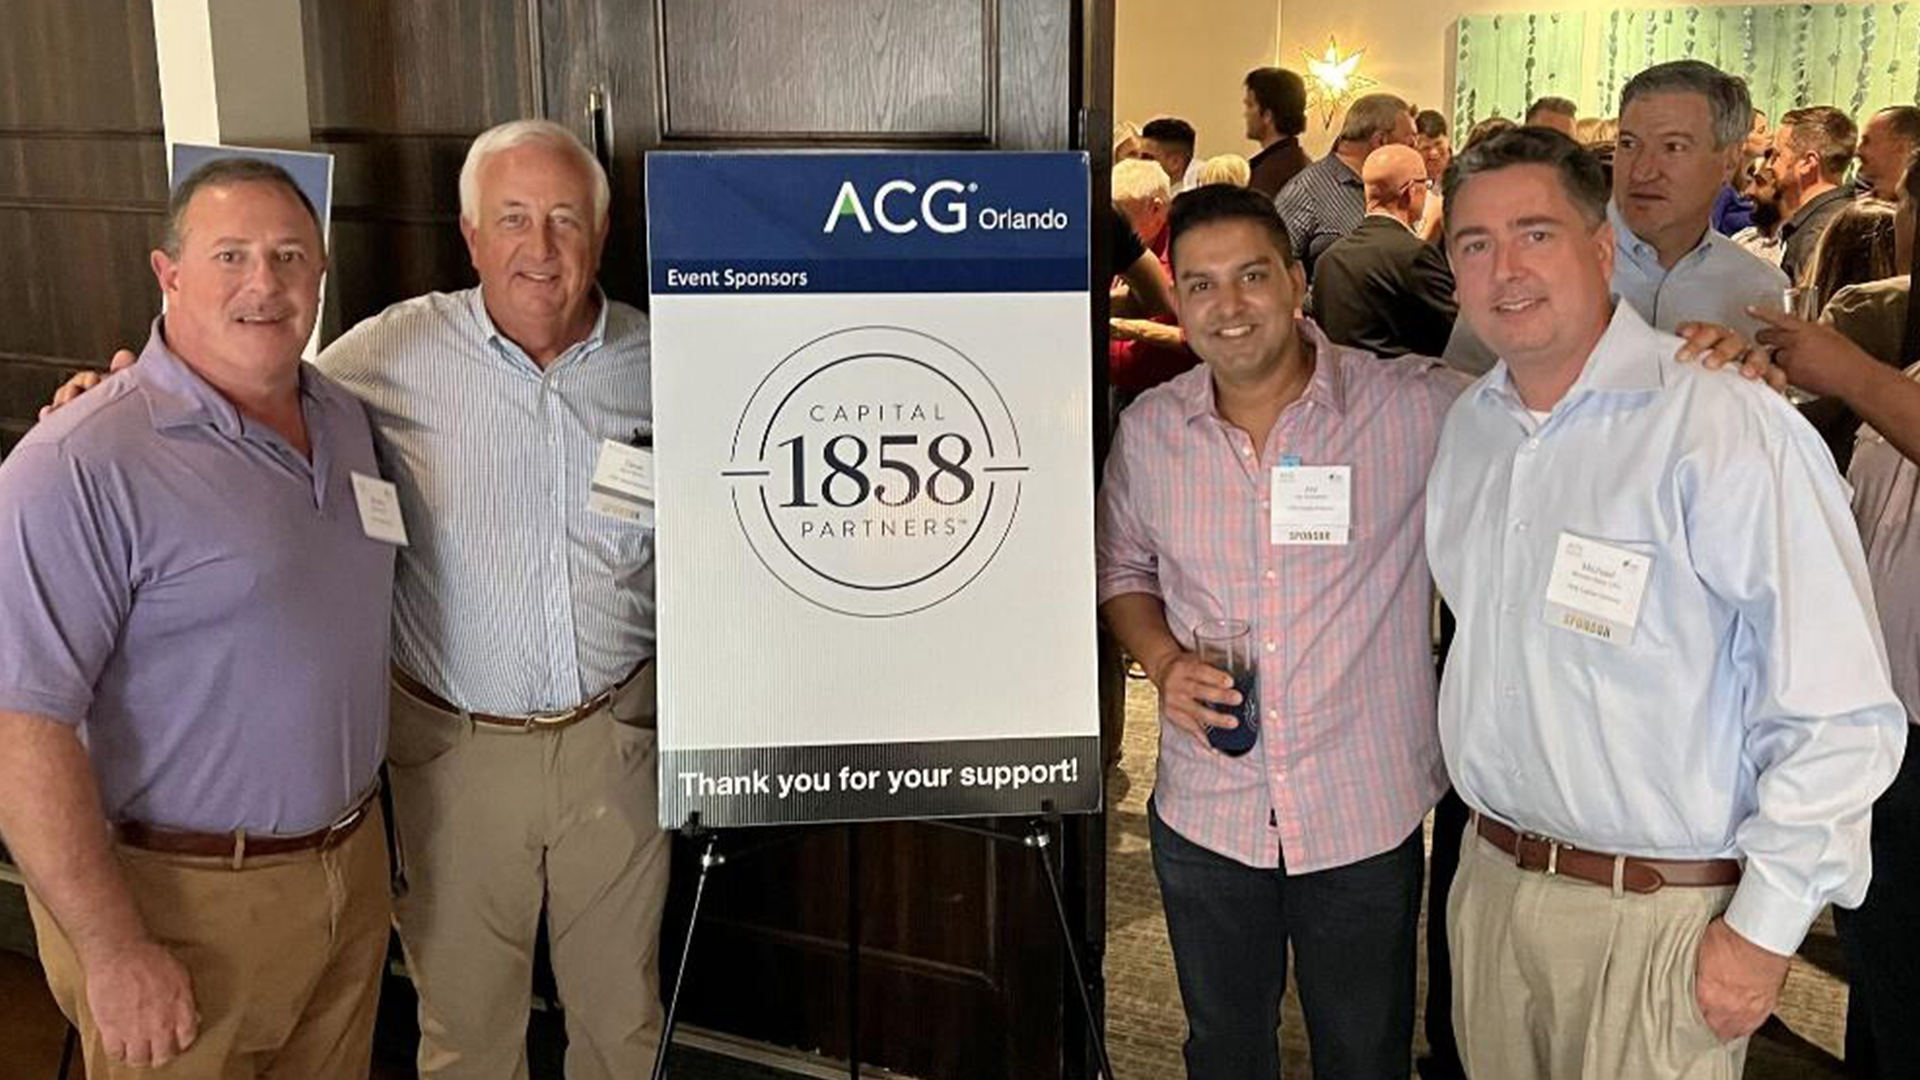 Mergers & Acquisitions firm 1858 Capital Partners Sponsors Annual ACG Event